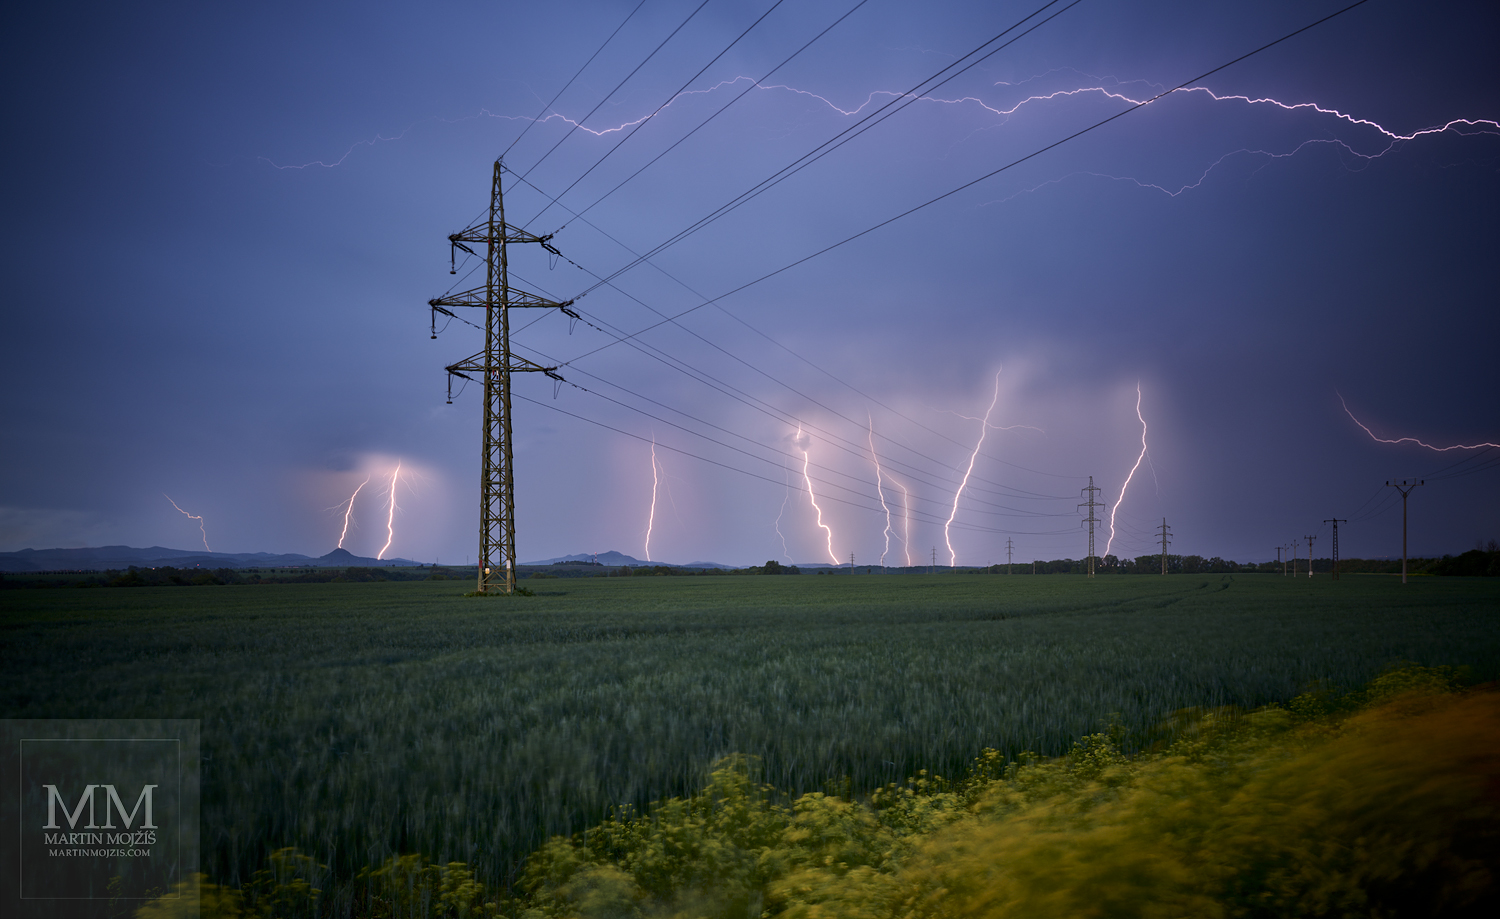 Landscape during a storm, electric power lines, lots of lightnings. Fine Art large format photograph ENERGY OF LATE SPRING. Photographer Martin Mojzis.